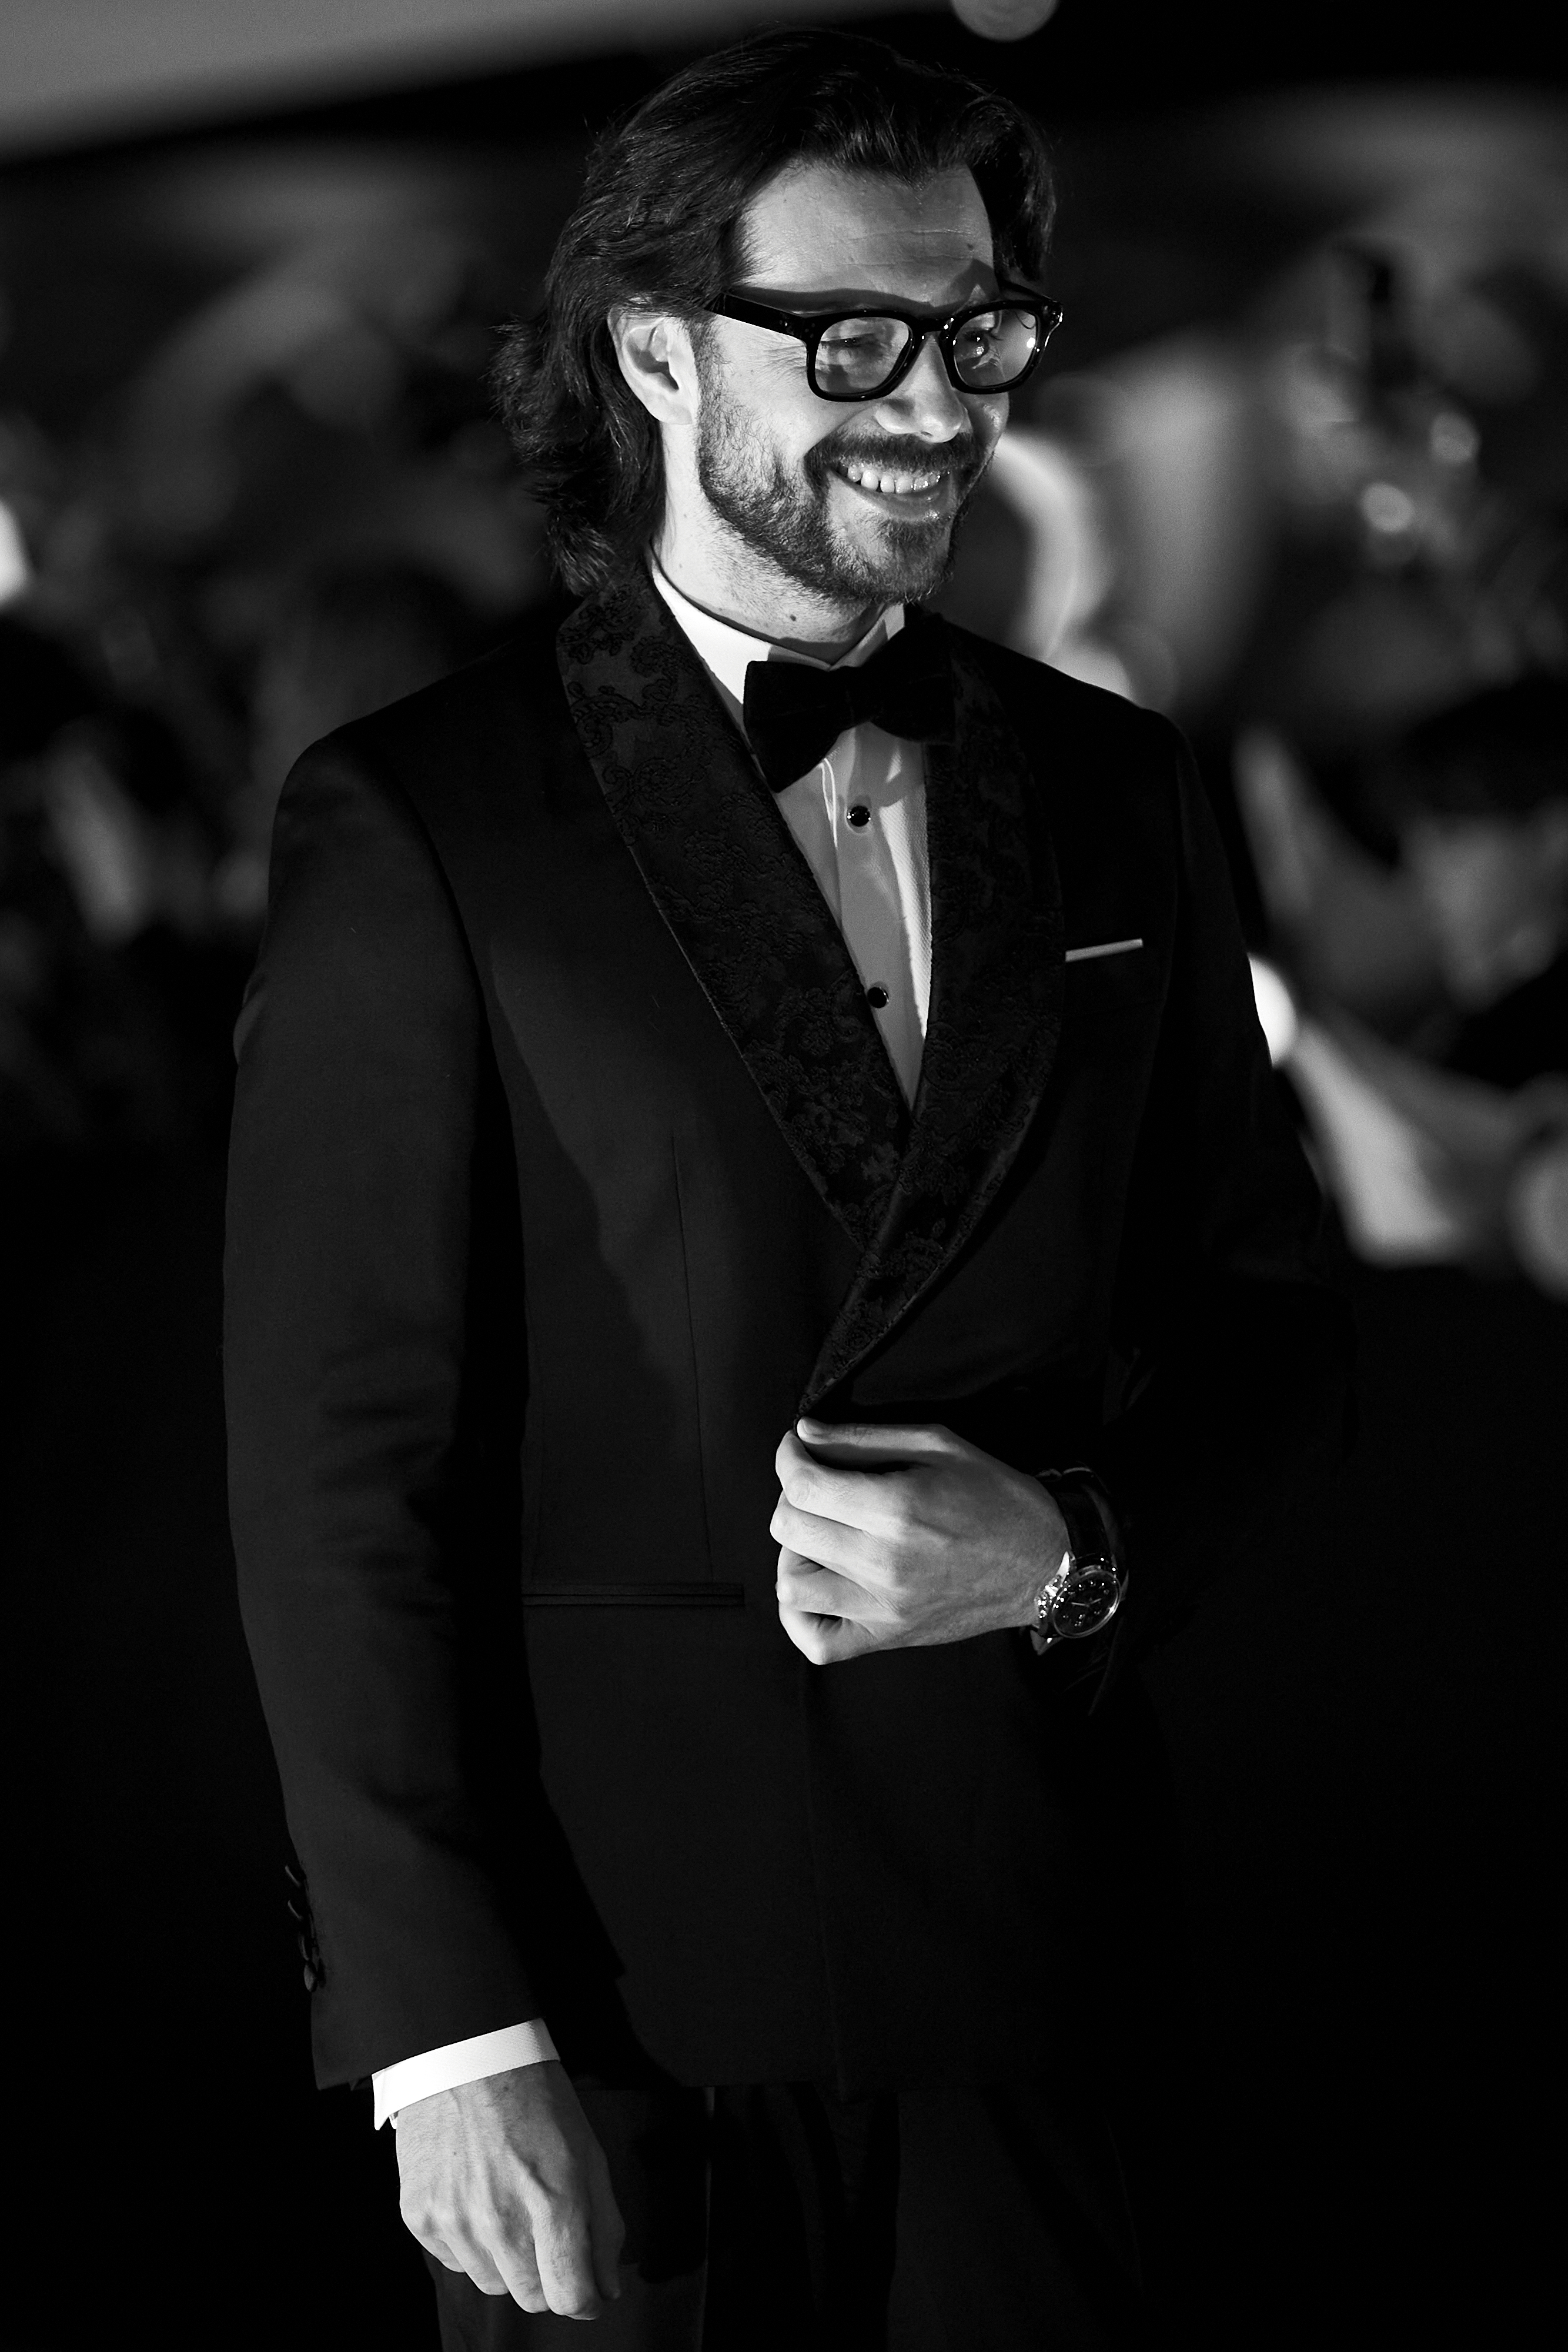 Alvaro Morte at the 36th edition of the "Goya Cinema Awards" ceremony on February 12, 2022, in Valencia, Spain | Source: Getty Images